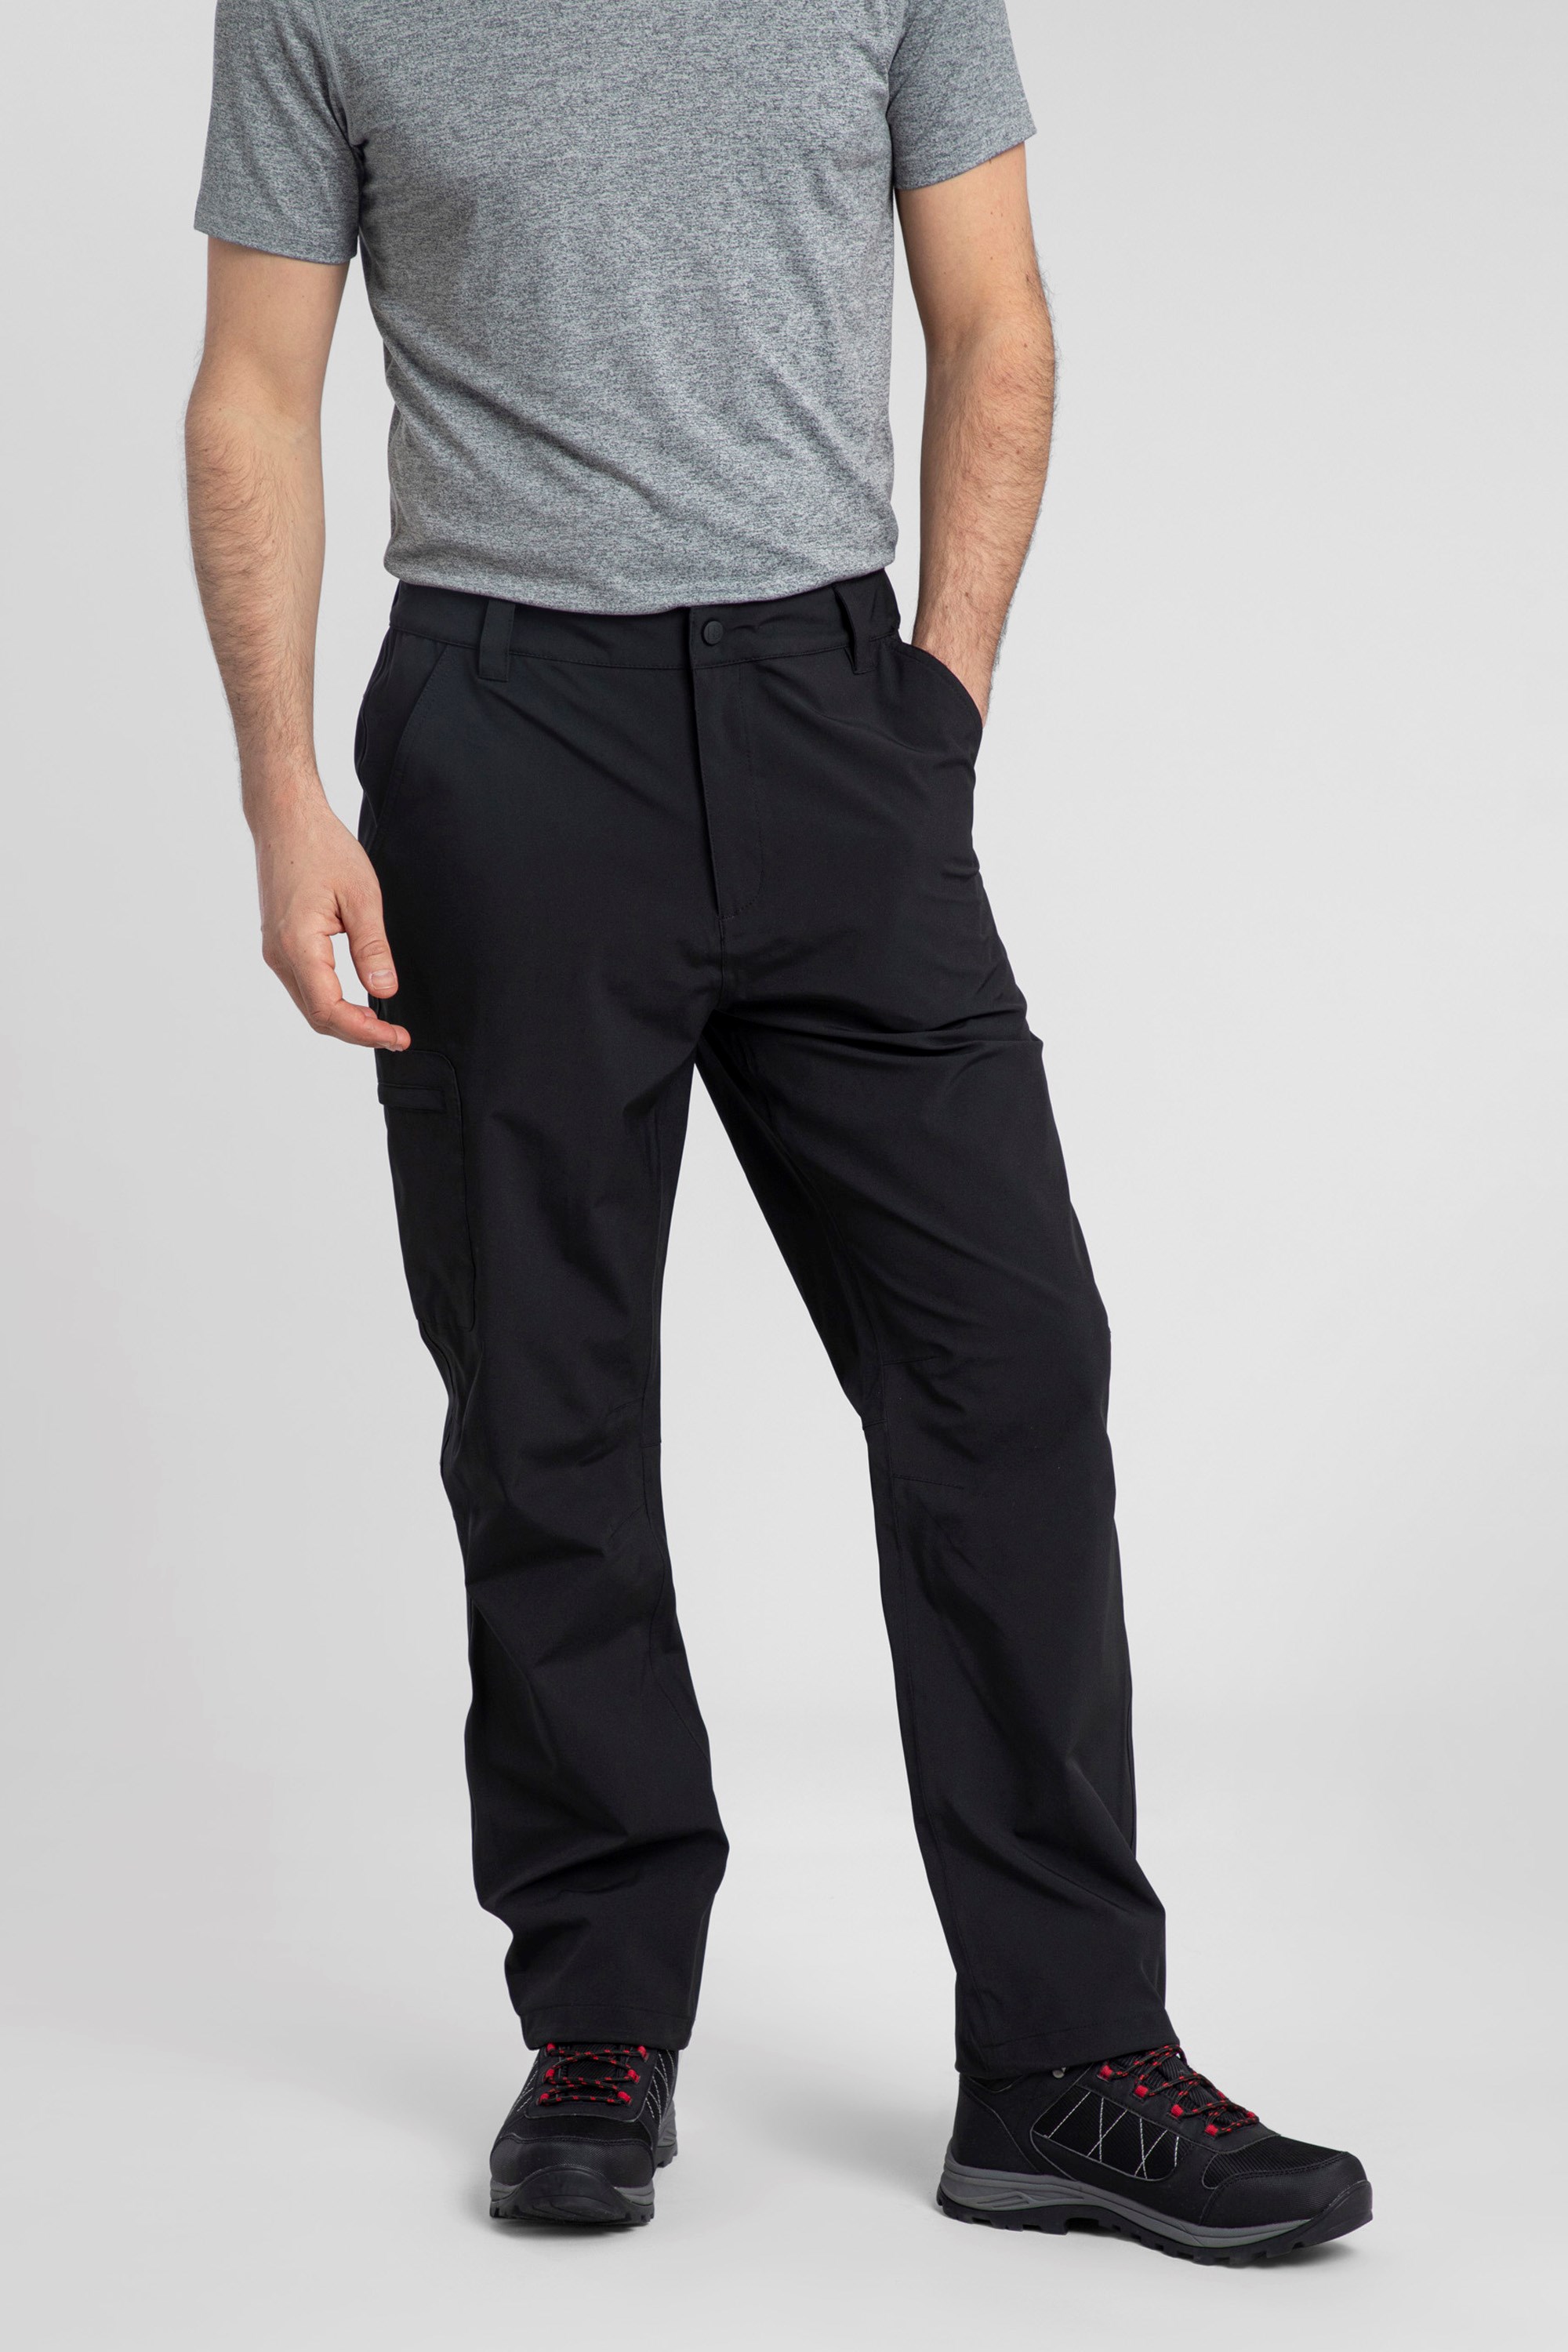 3 Layer Extreme Waterproof Mens Trousers - Black